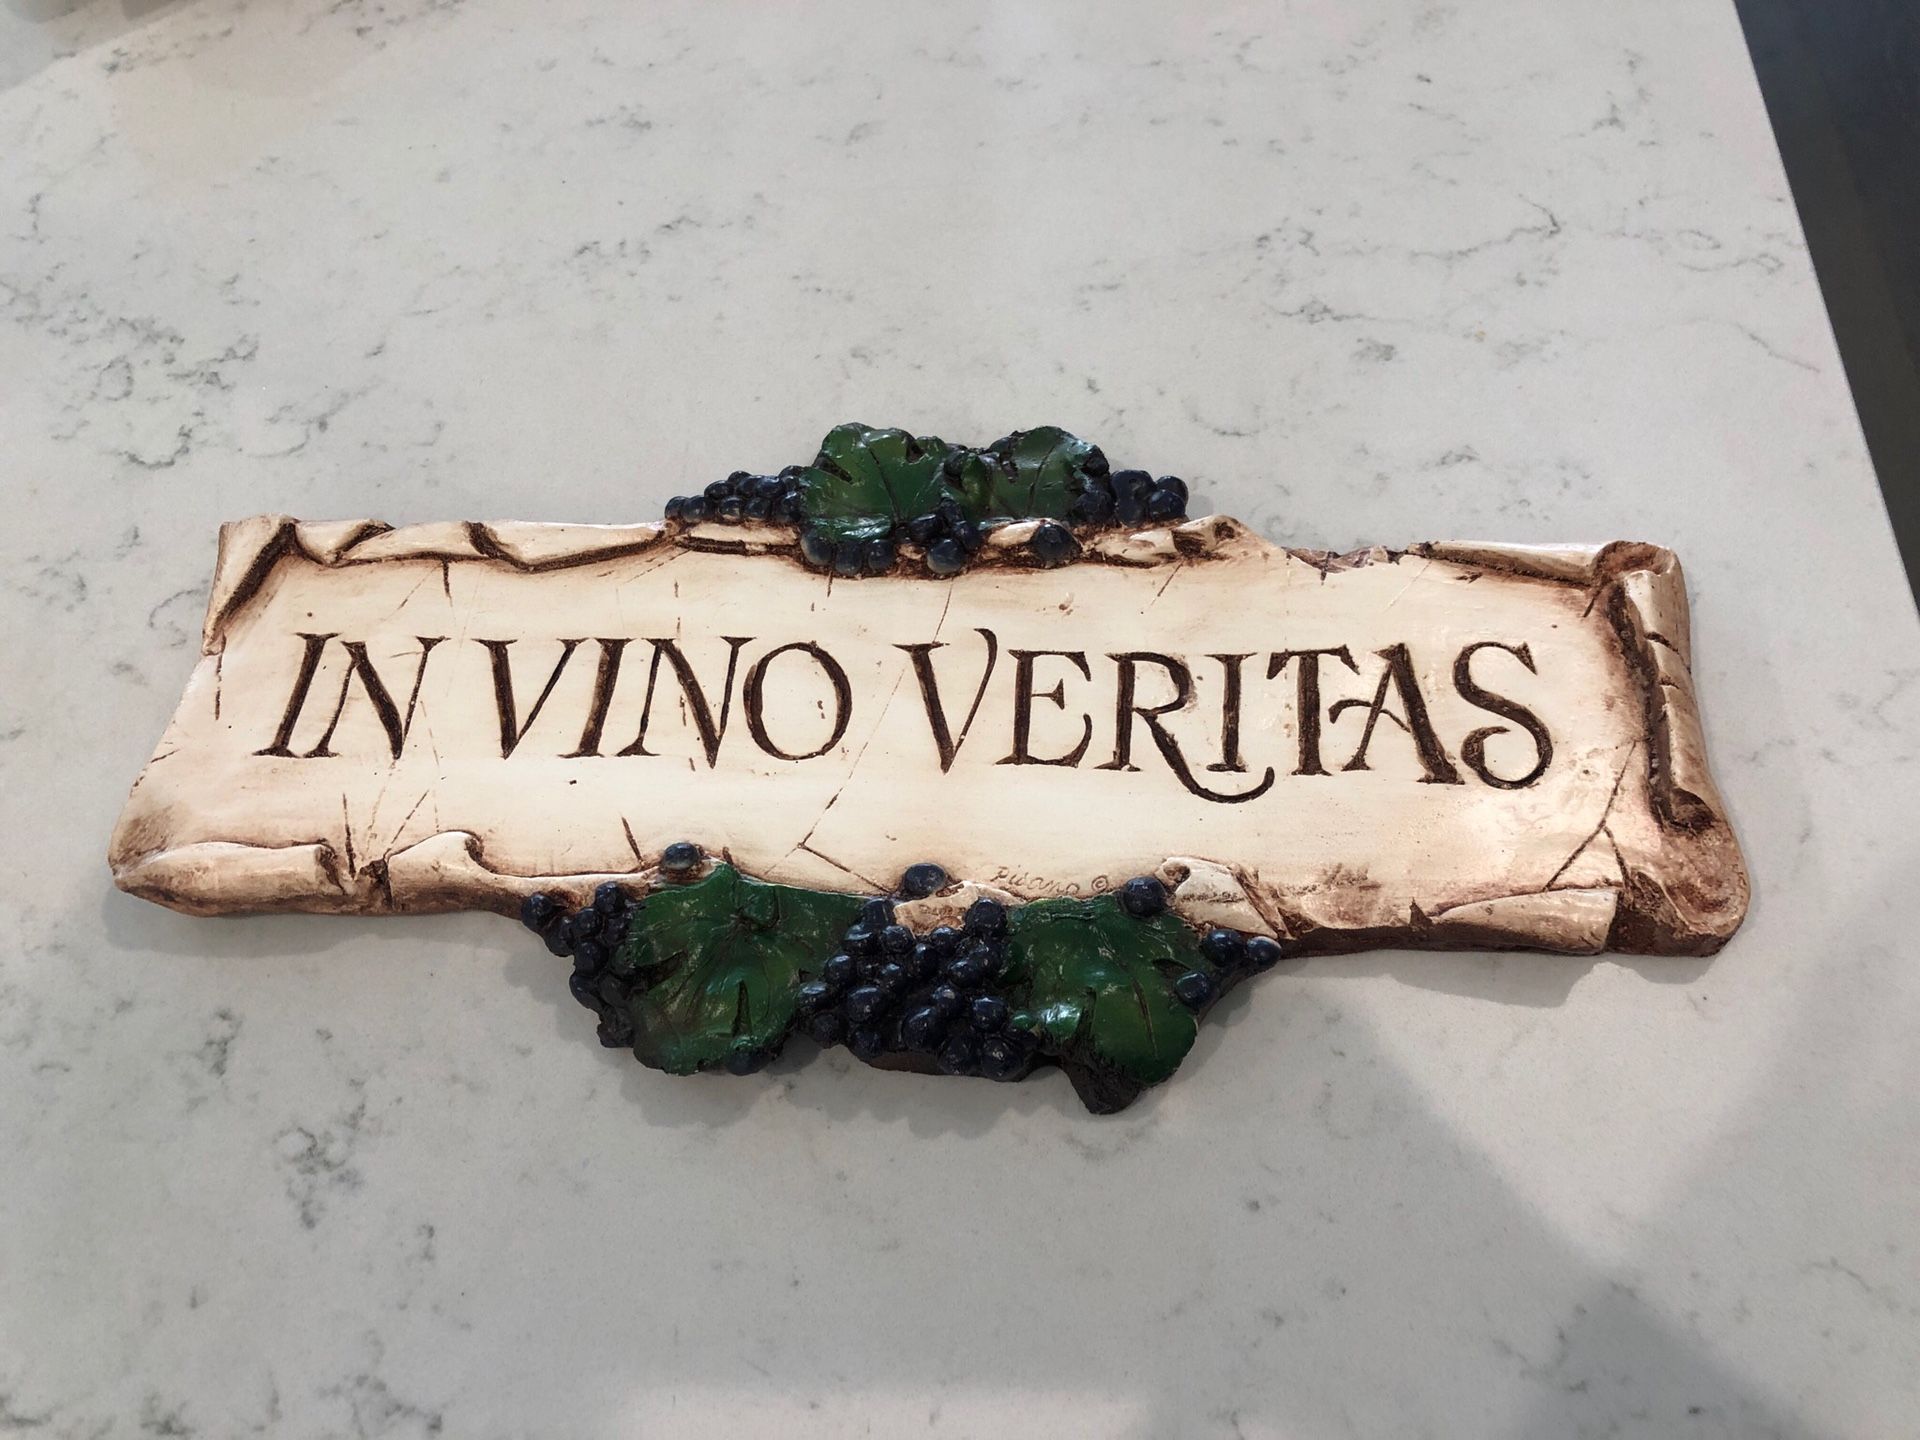 In Vino Veritas - "In wine there is truth"